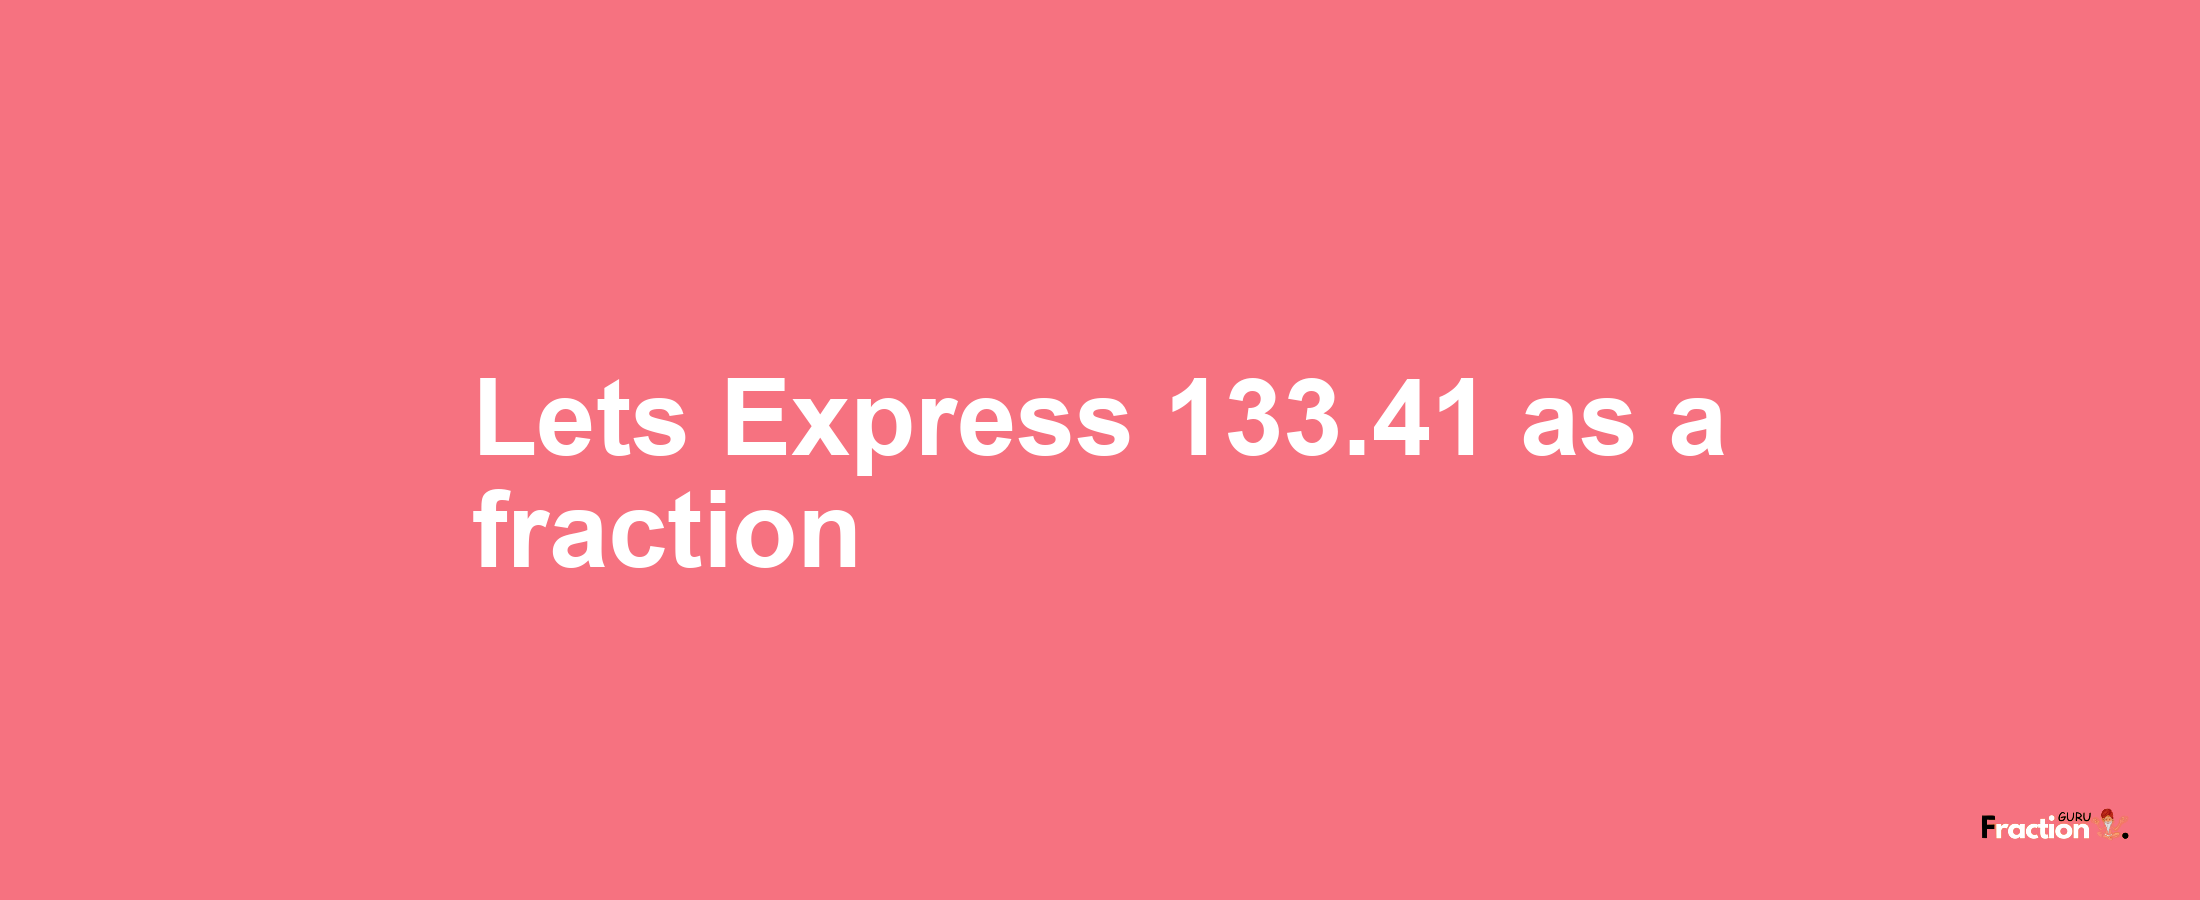 Lets Express 133.41 as afraction